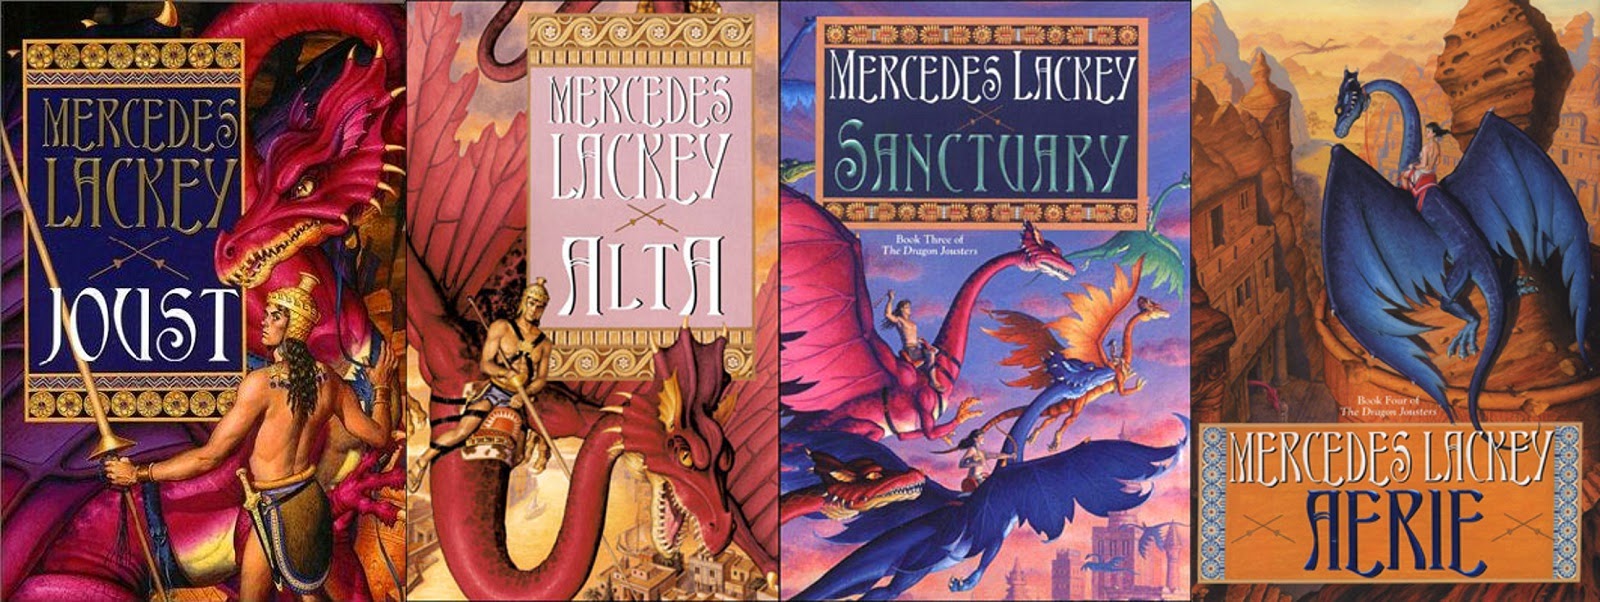 Dragon Jousters by Mercedes Lackey | Epic Fantasy Series Summary